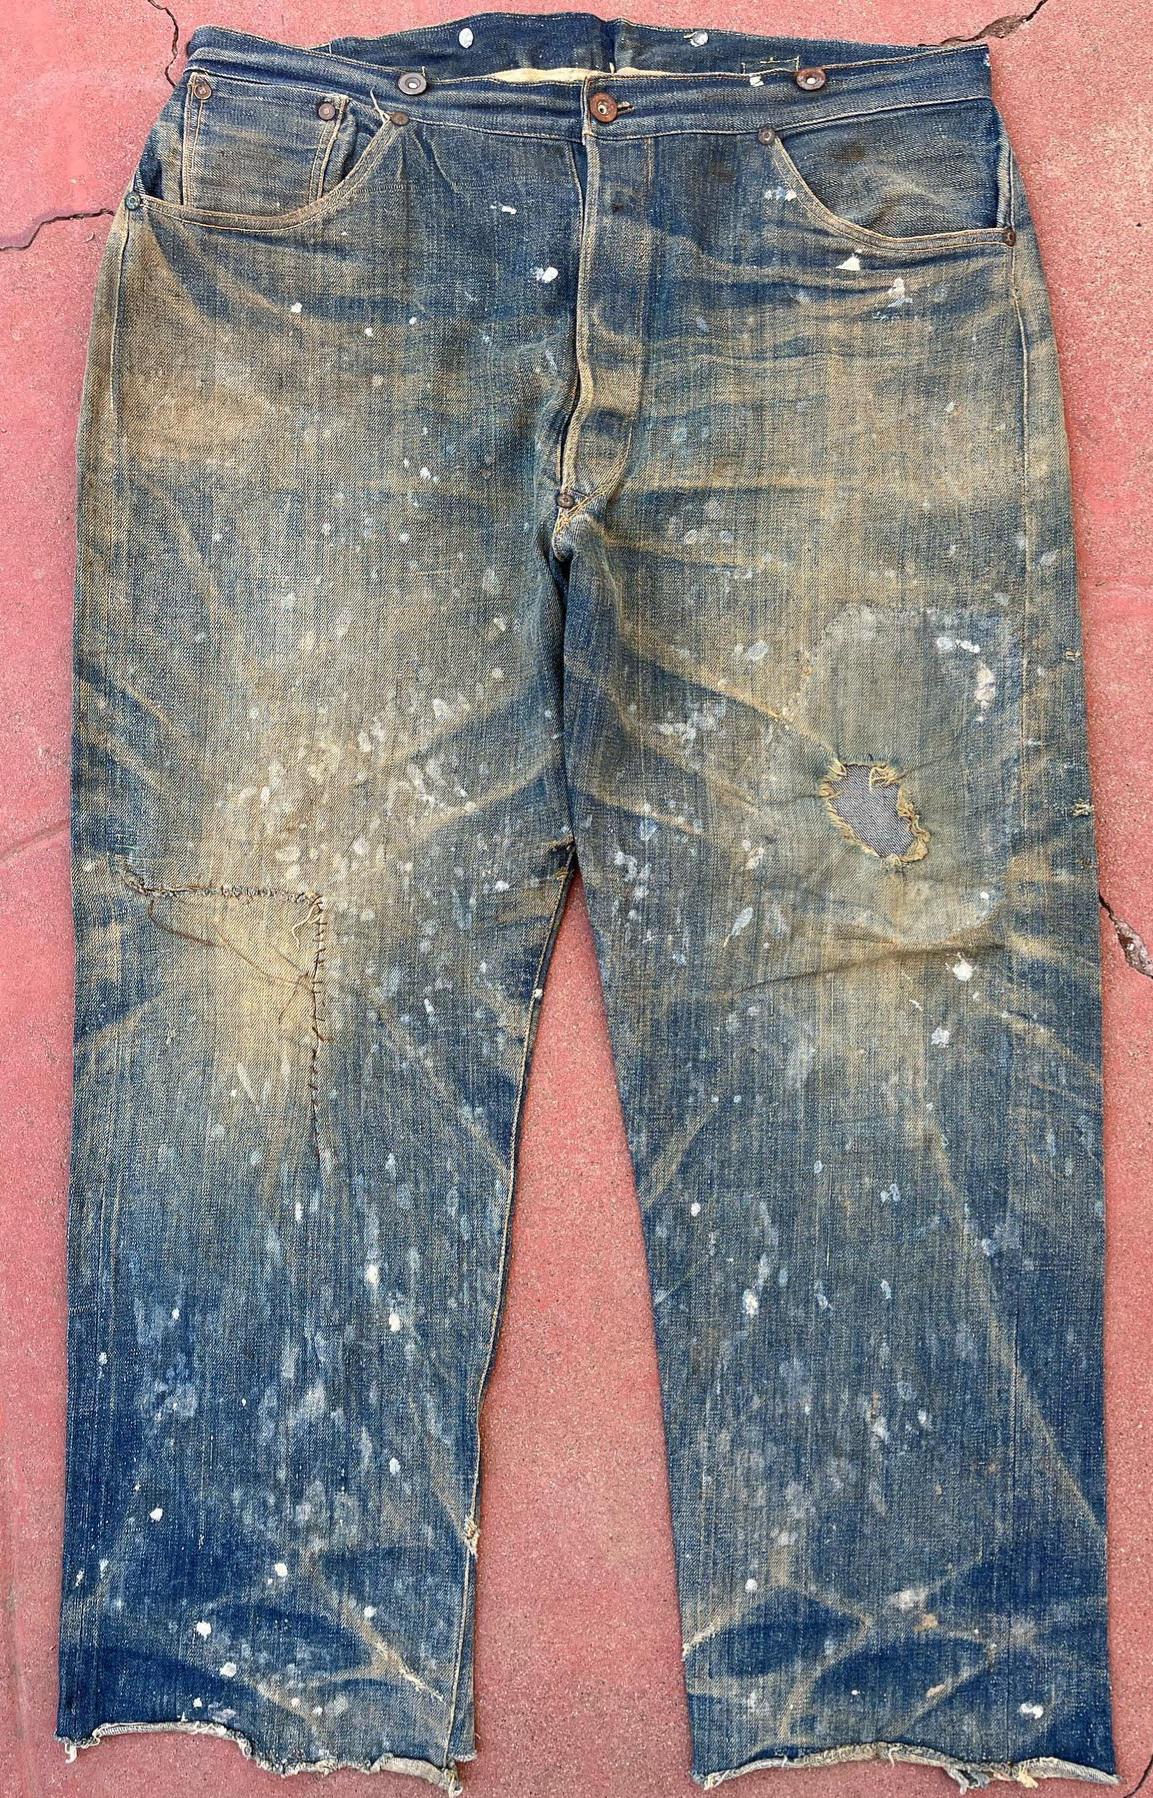 A pair of Levi's jeans from the 1880s found down an abandoned New Mexico mine have been sold at auction for a total of $87,400.jpg